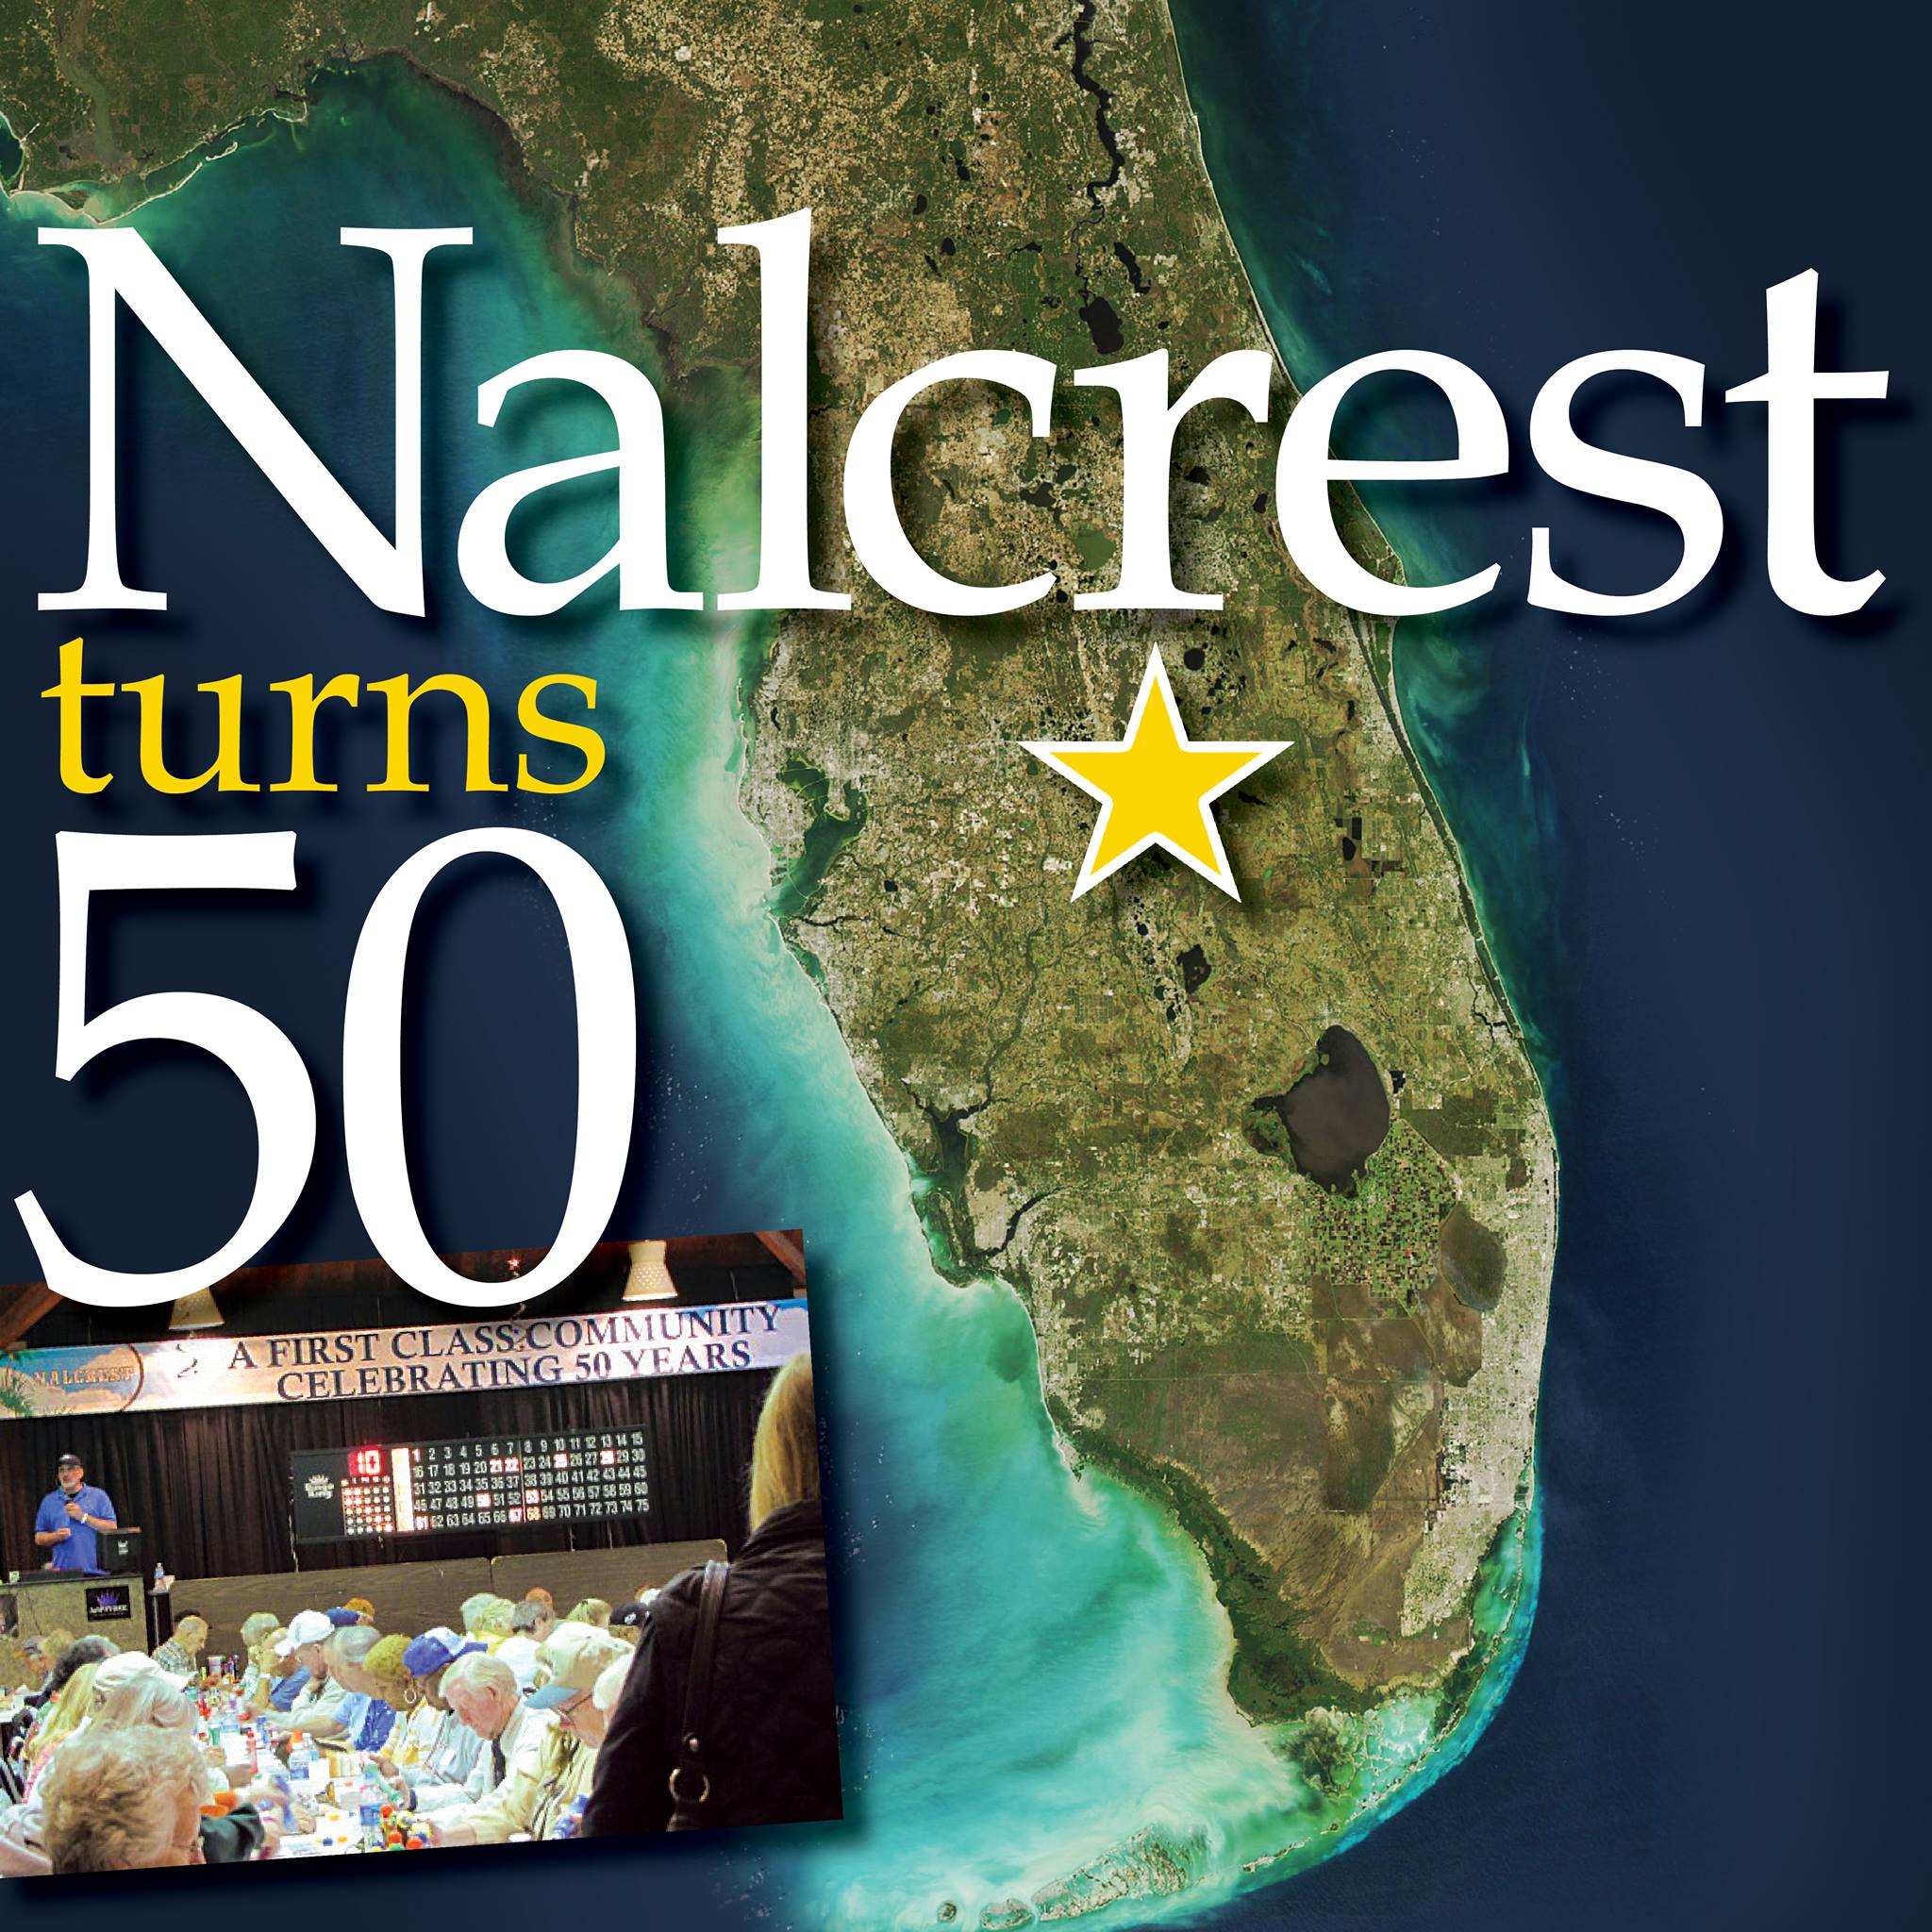 Nalcrest at 50